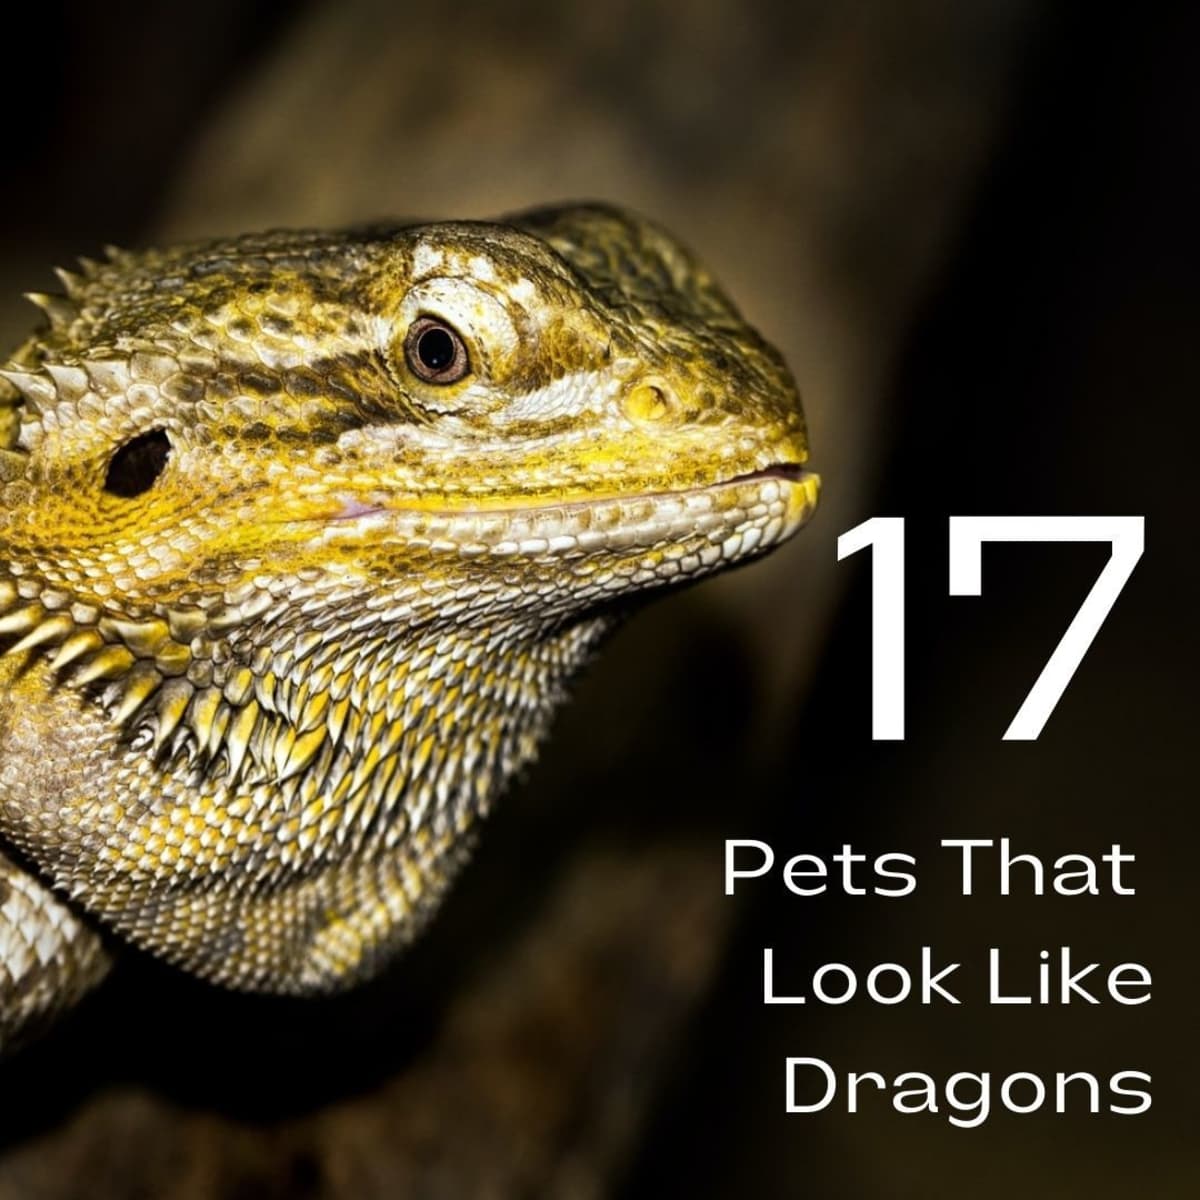 17 Pets You Can Legally Own That Look Like Dragons - PetHelpful